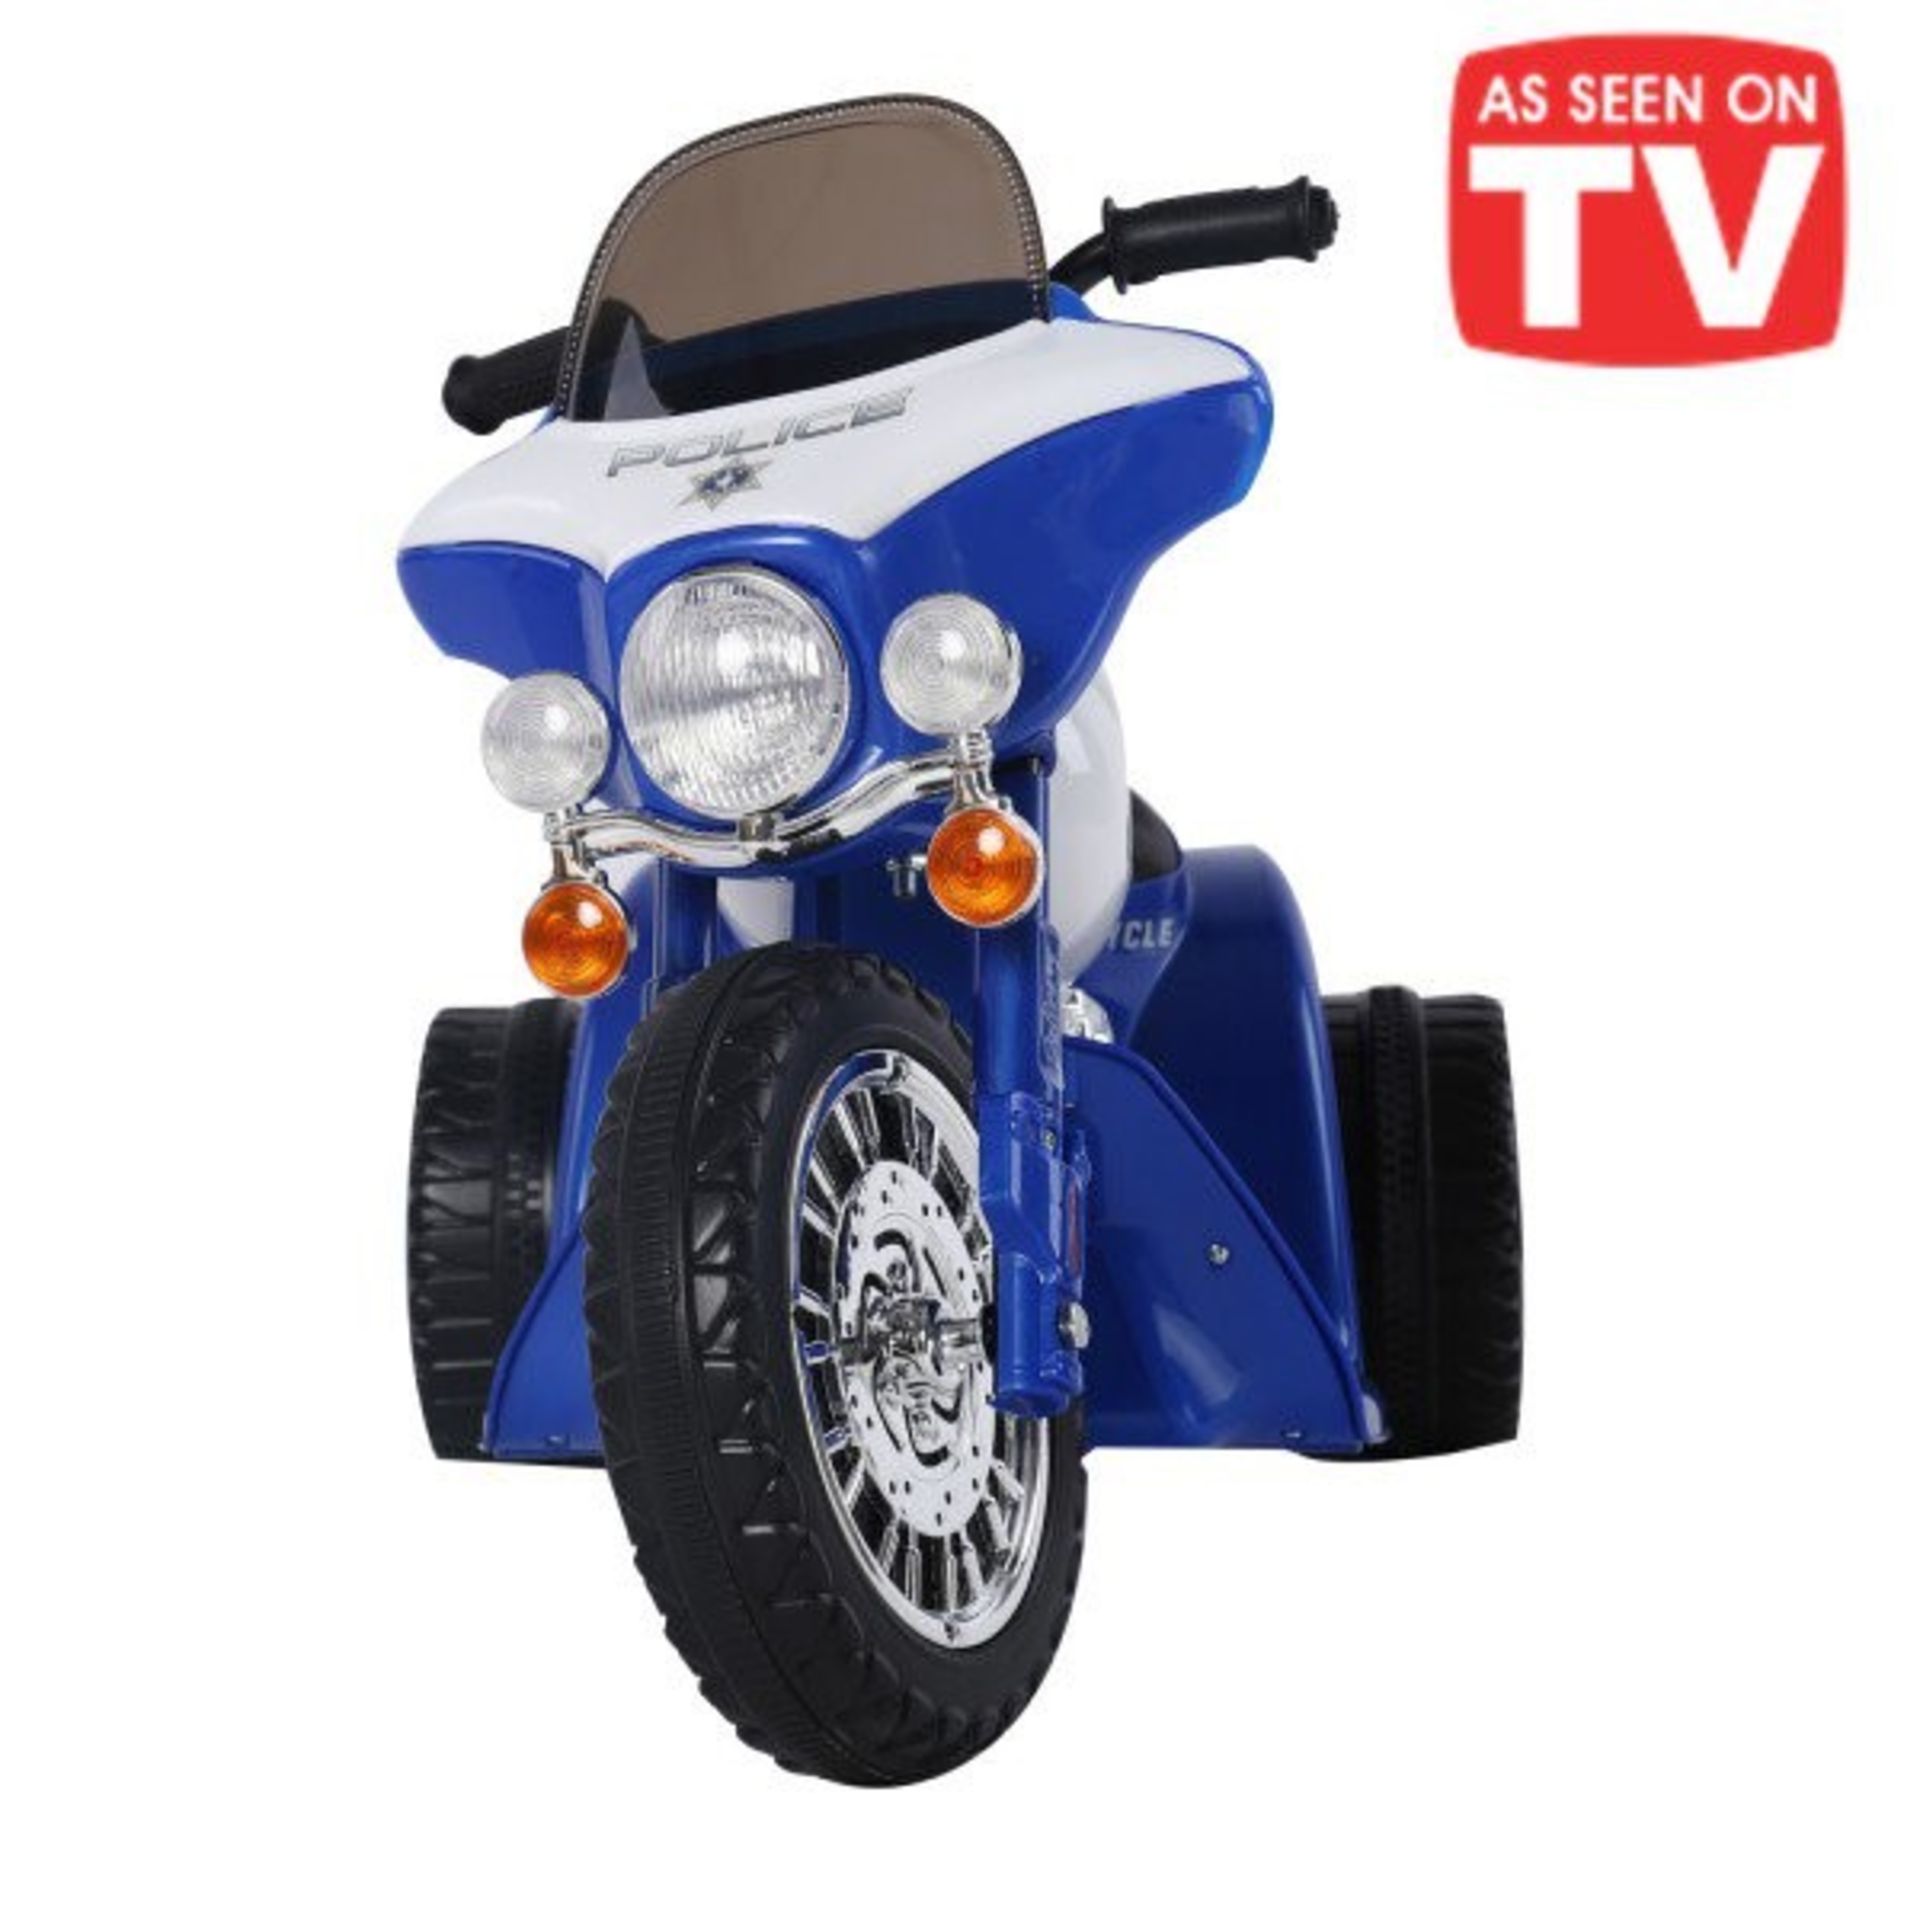 1 AS NEW BOXED CHILDRENS POLICE ELECTRIC RIDE ON TRICYCLE IN BLUE AND WHITE RRP £149.99